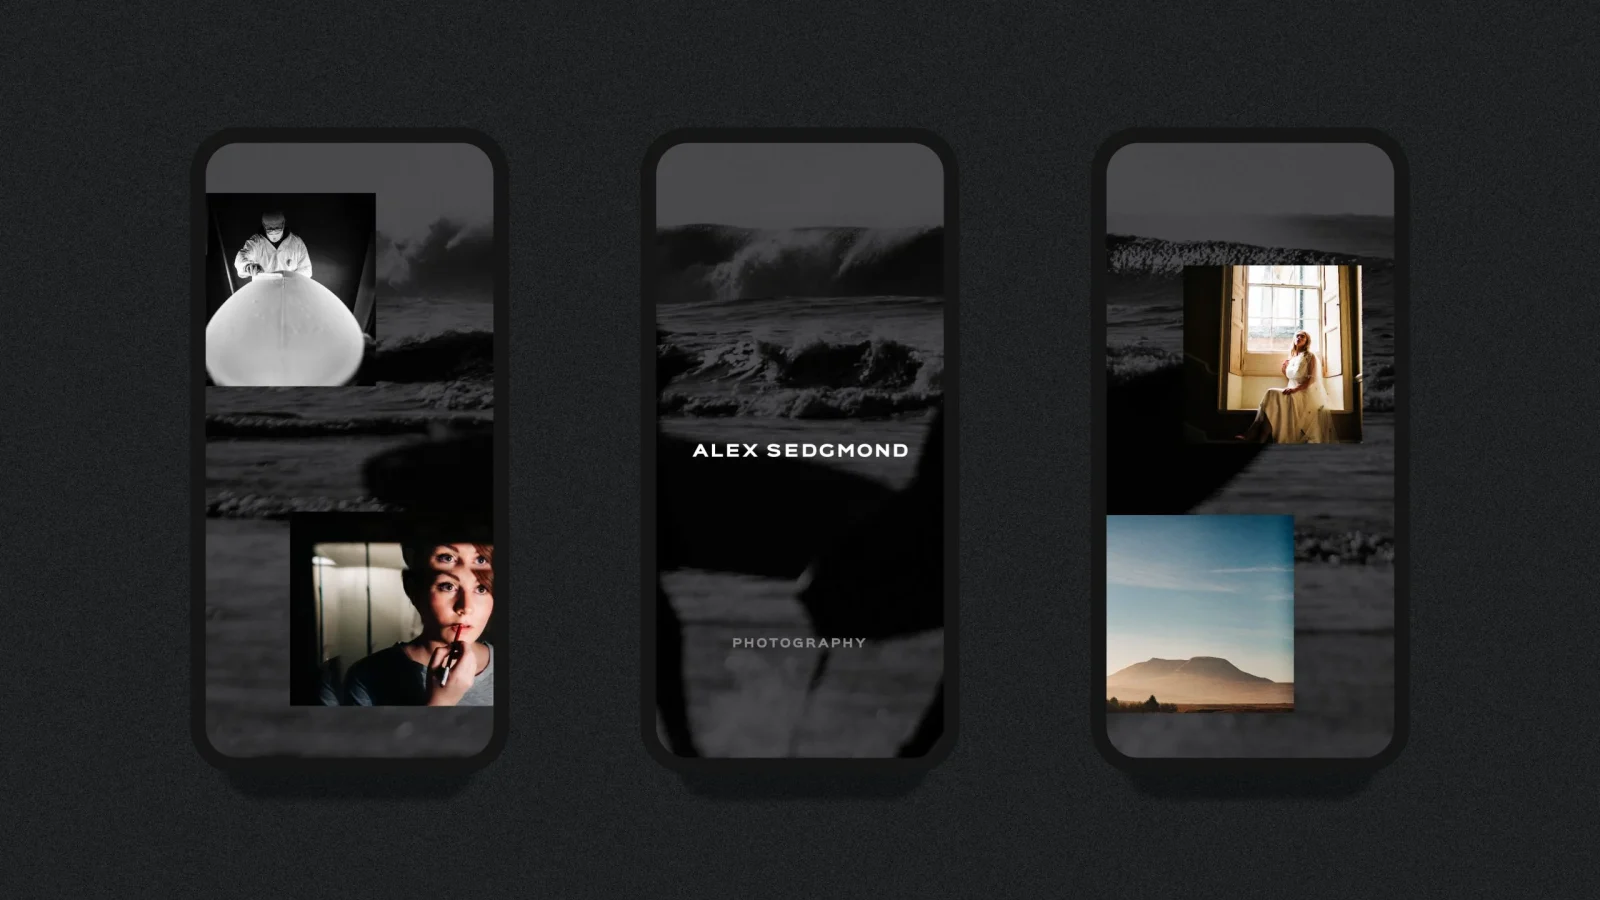 Three smartphones showcasing a design agency's portfolio, including a wedding dress, a dramatic ocean wave, a bride in a window, a screaming man, and a serene sunset landscape.